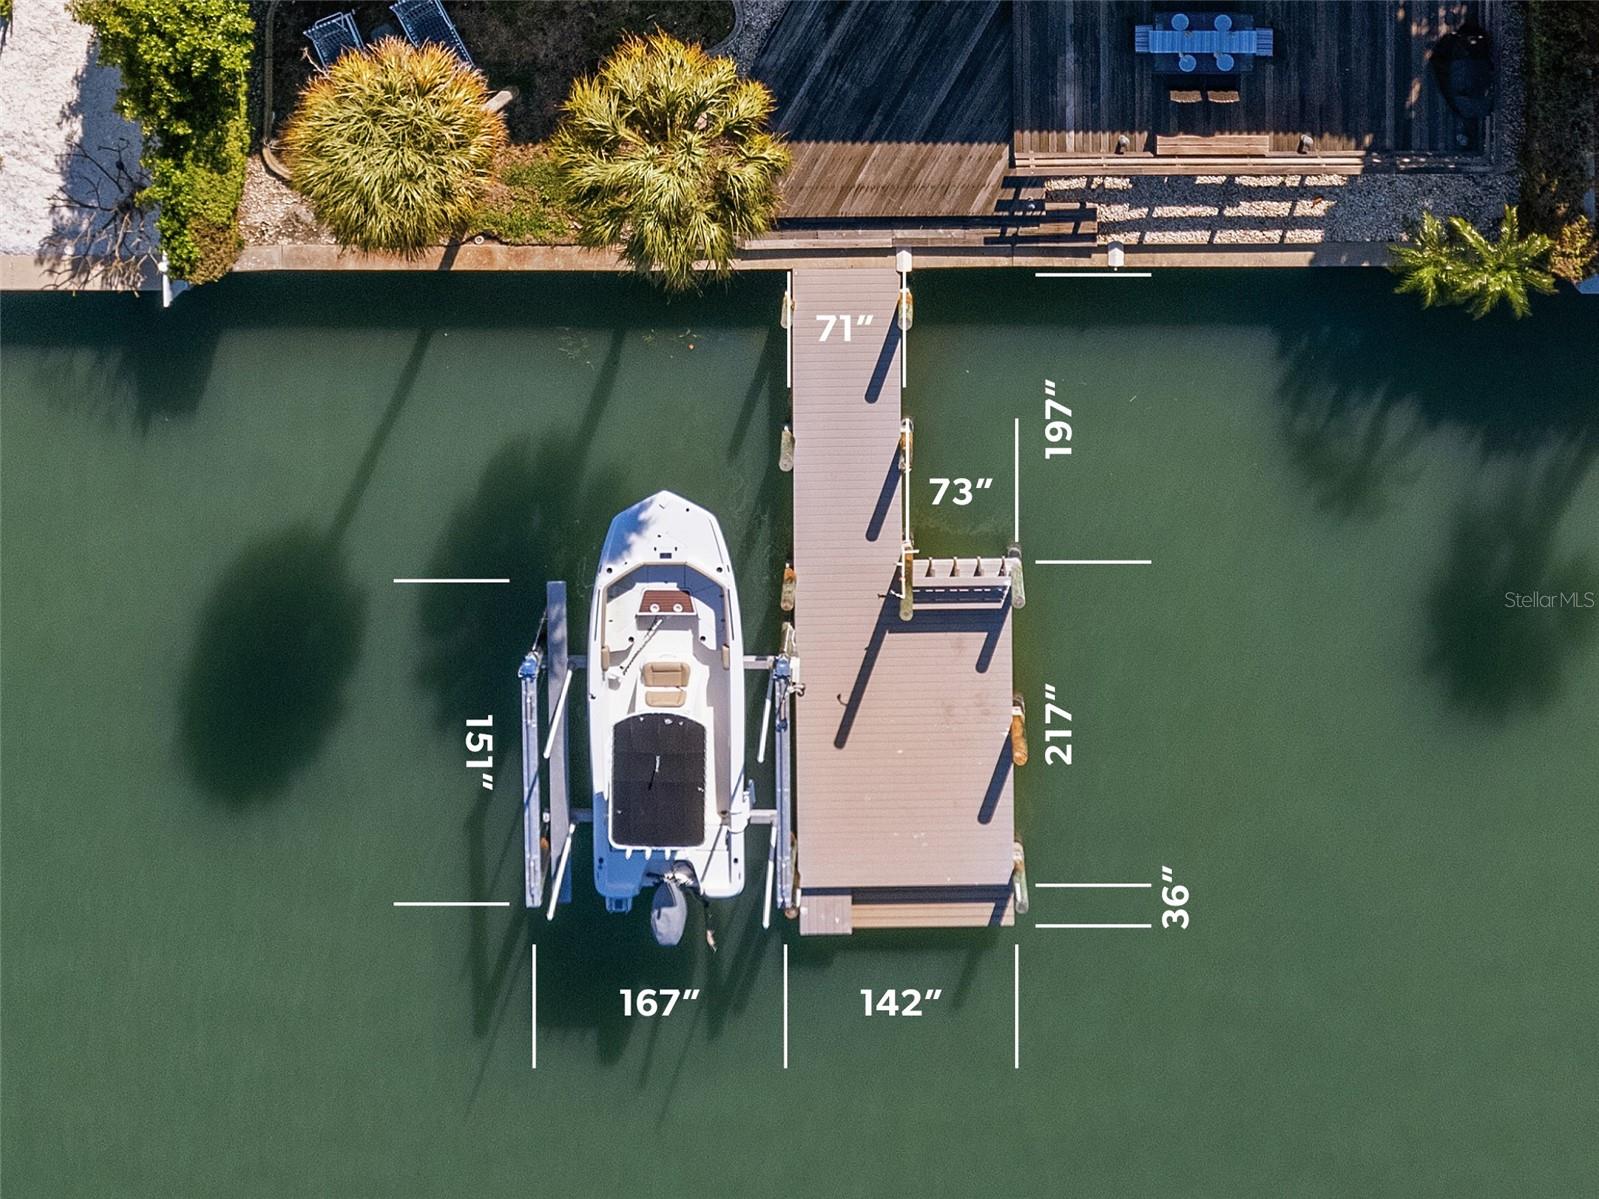 As you can see, the dock is generously proportioned and has ample room for other watercraft to tie up!